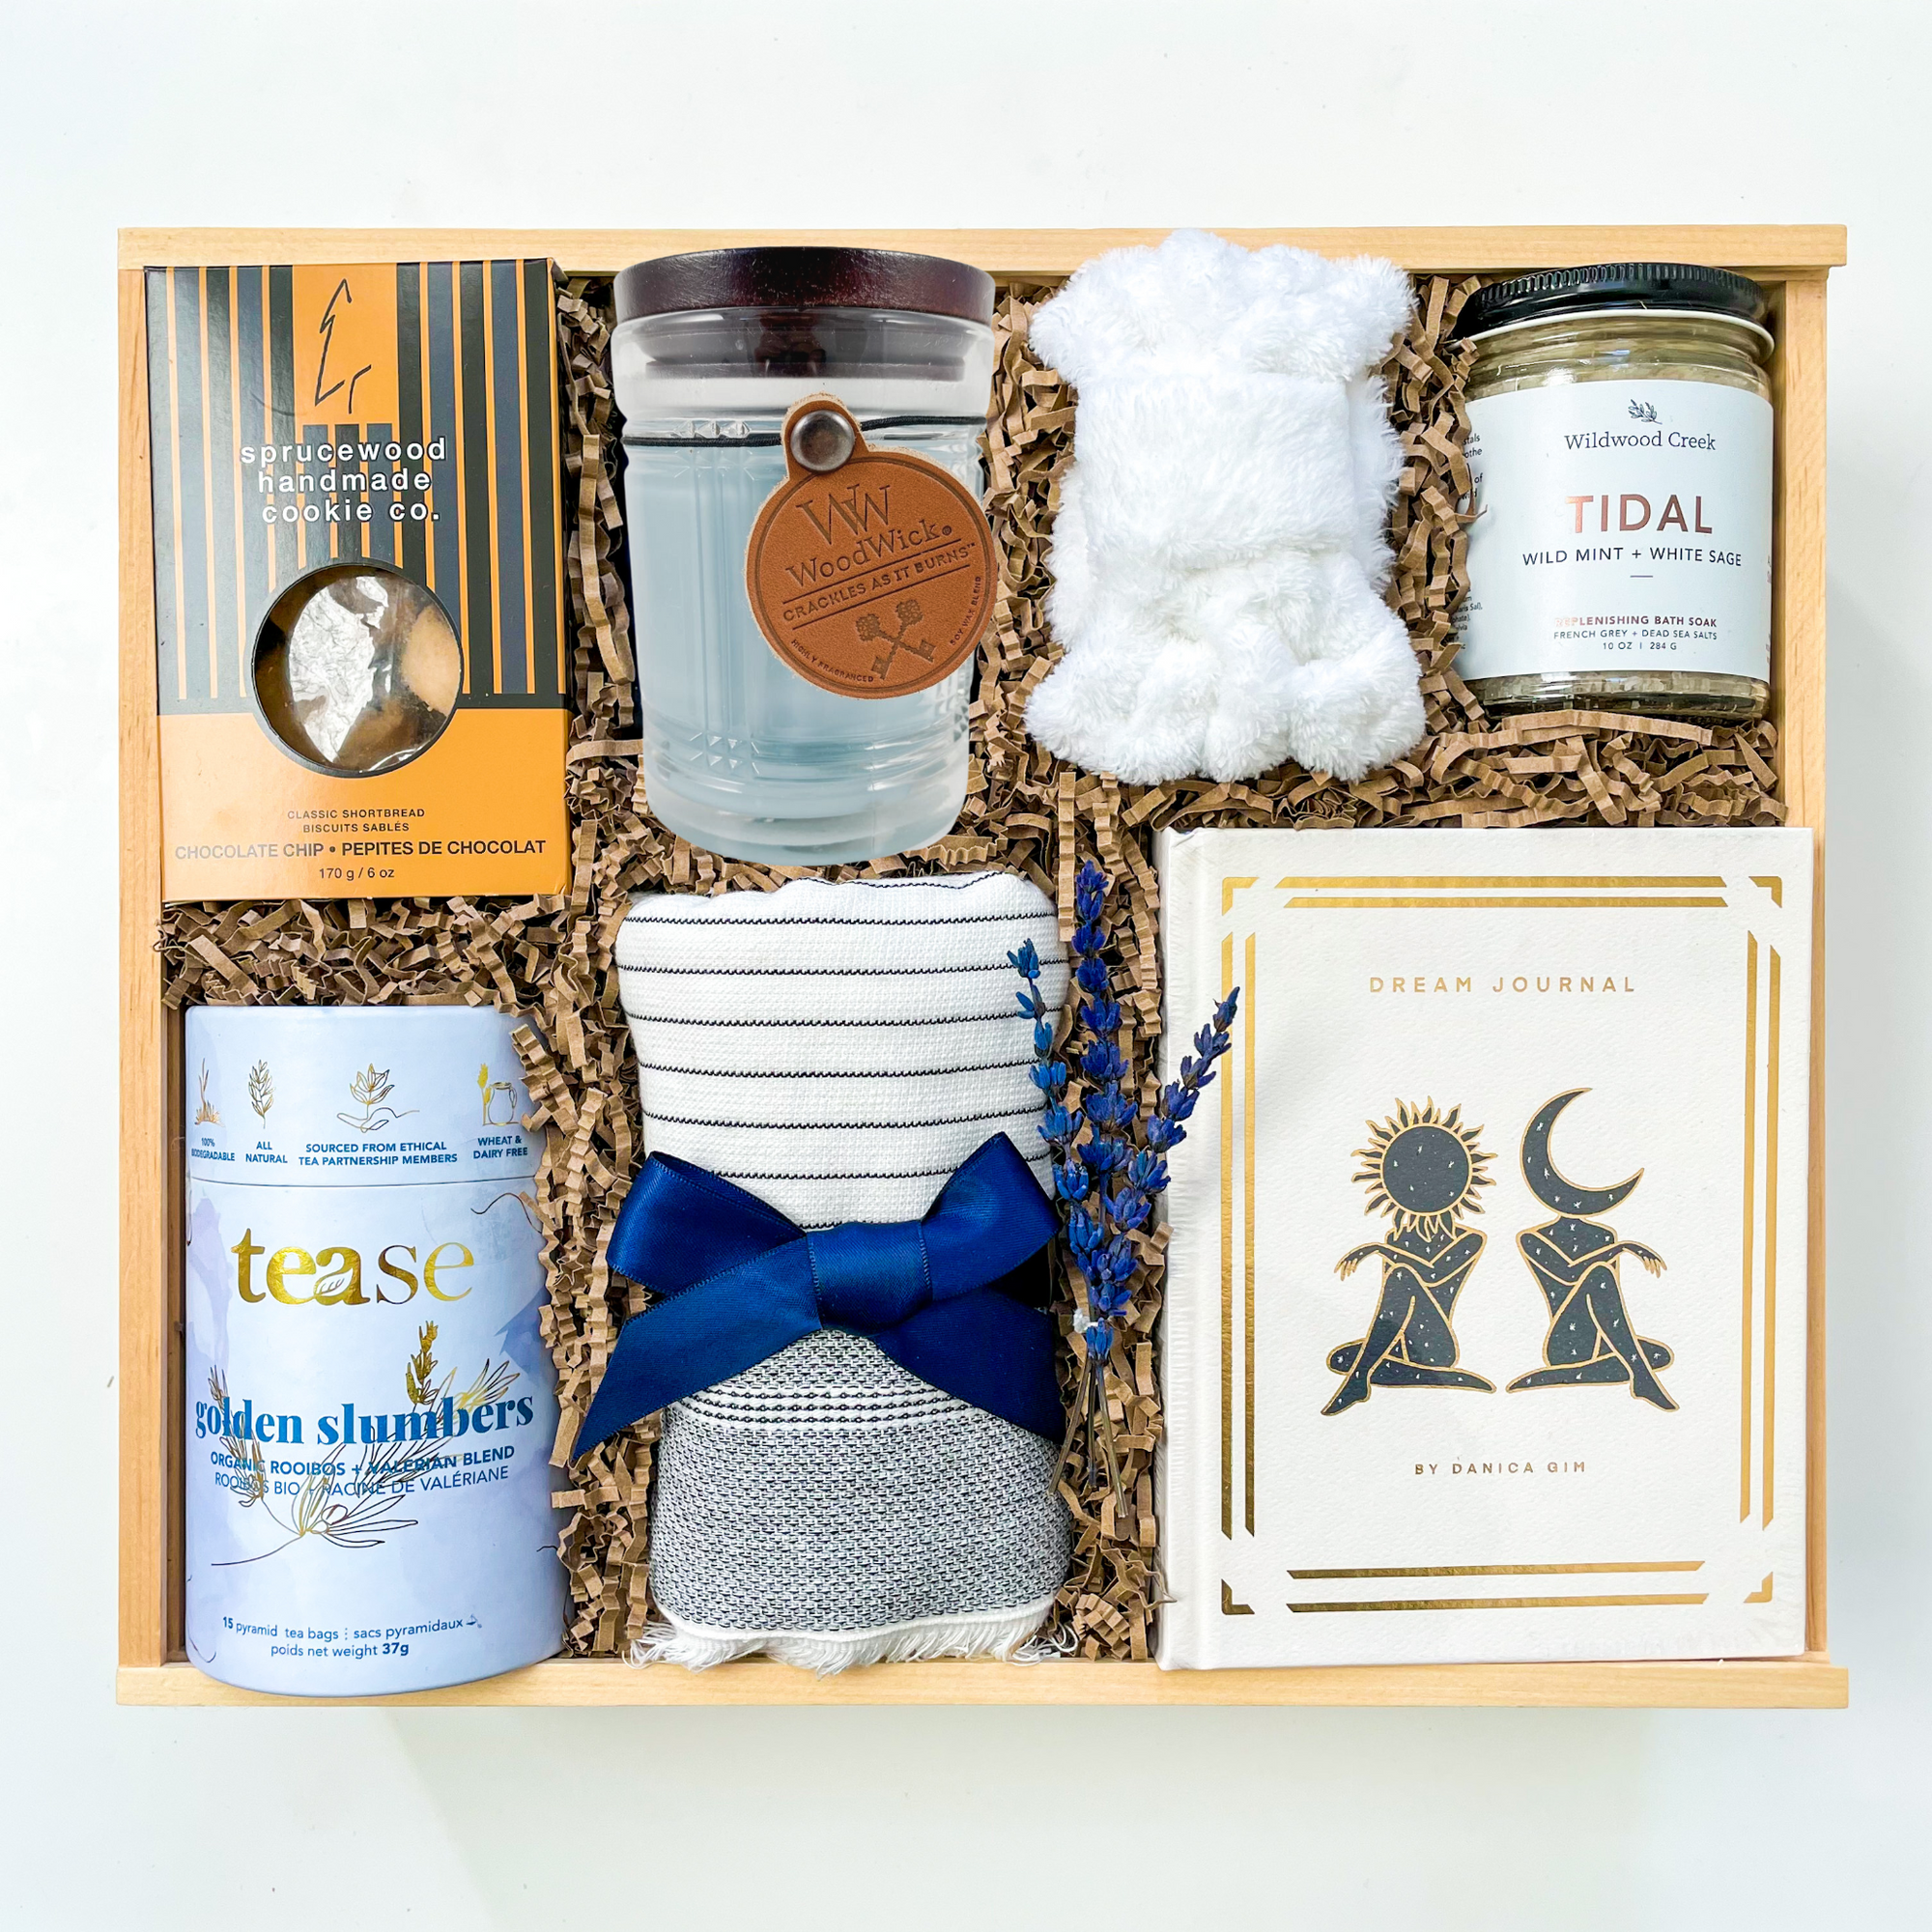 Wellness Gift, Wellness Gift Delivered, Shipped Wellness Gift, Self Care Gift, Healing Gift, Wellness Gift Basket, Wellness Gift Box, Healing Gift Basket, Healing Gift Box, Self Care Gift Box, Self Care Gift Basket, Gift For Her, Women's Gift, Sympathy gift, grief gifts, thoughtful gifts, gifts to send at time of loss, self care gift ideas, unique self care gifts, unique sympathy gifts, comforting gift ideas, comforting gifts, blue women's gift, blue gift box, blue gift ideas